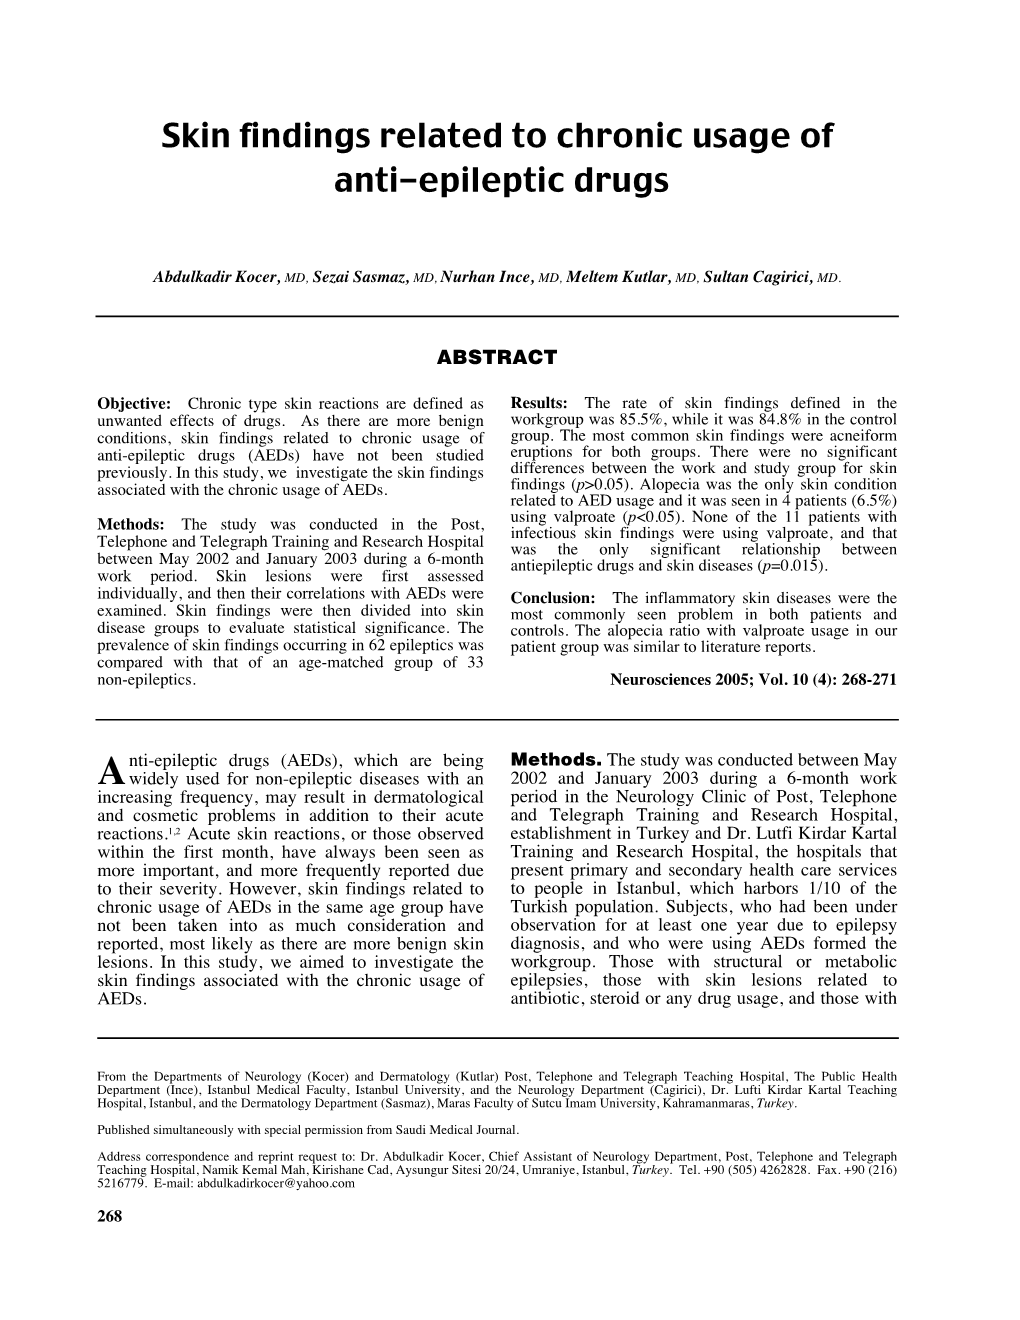 Skin Findings Related to Chronic Usage of Anti-Epileptic Drugs